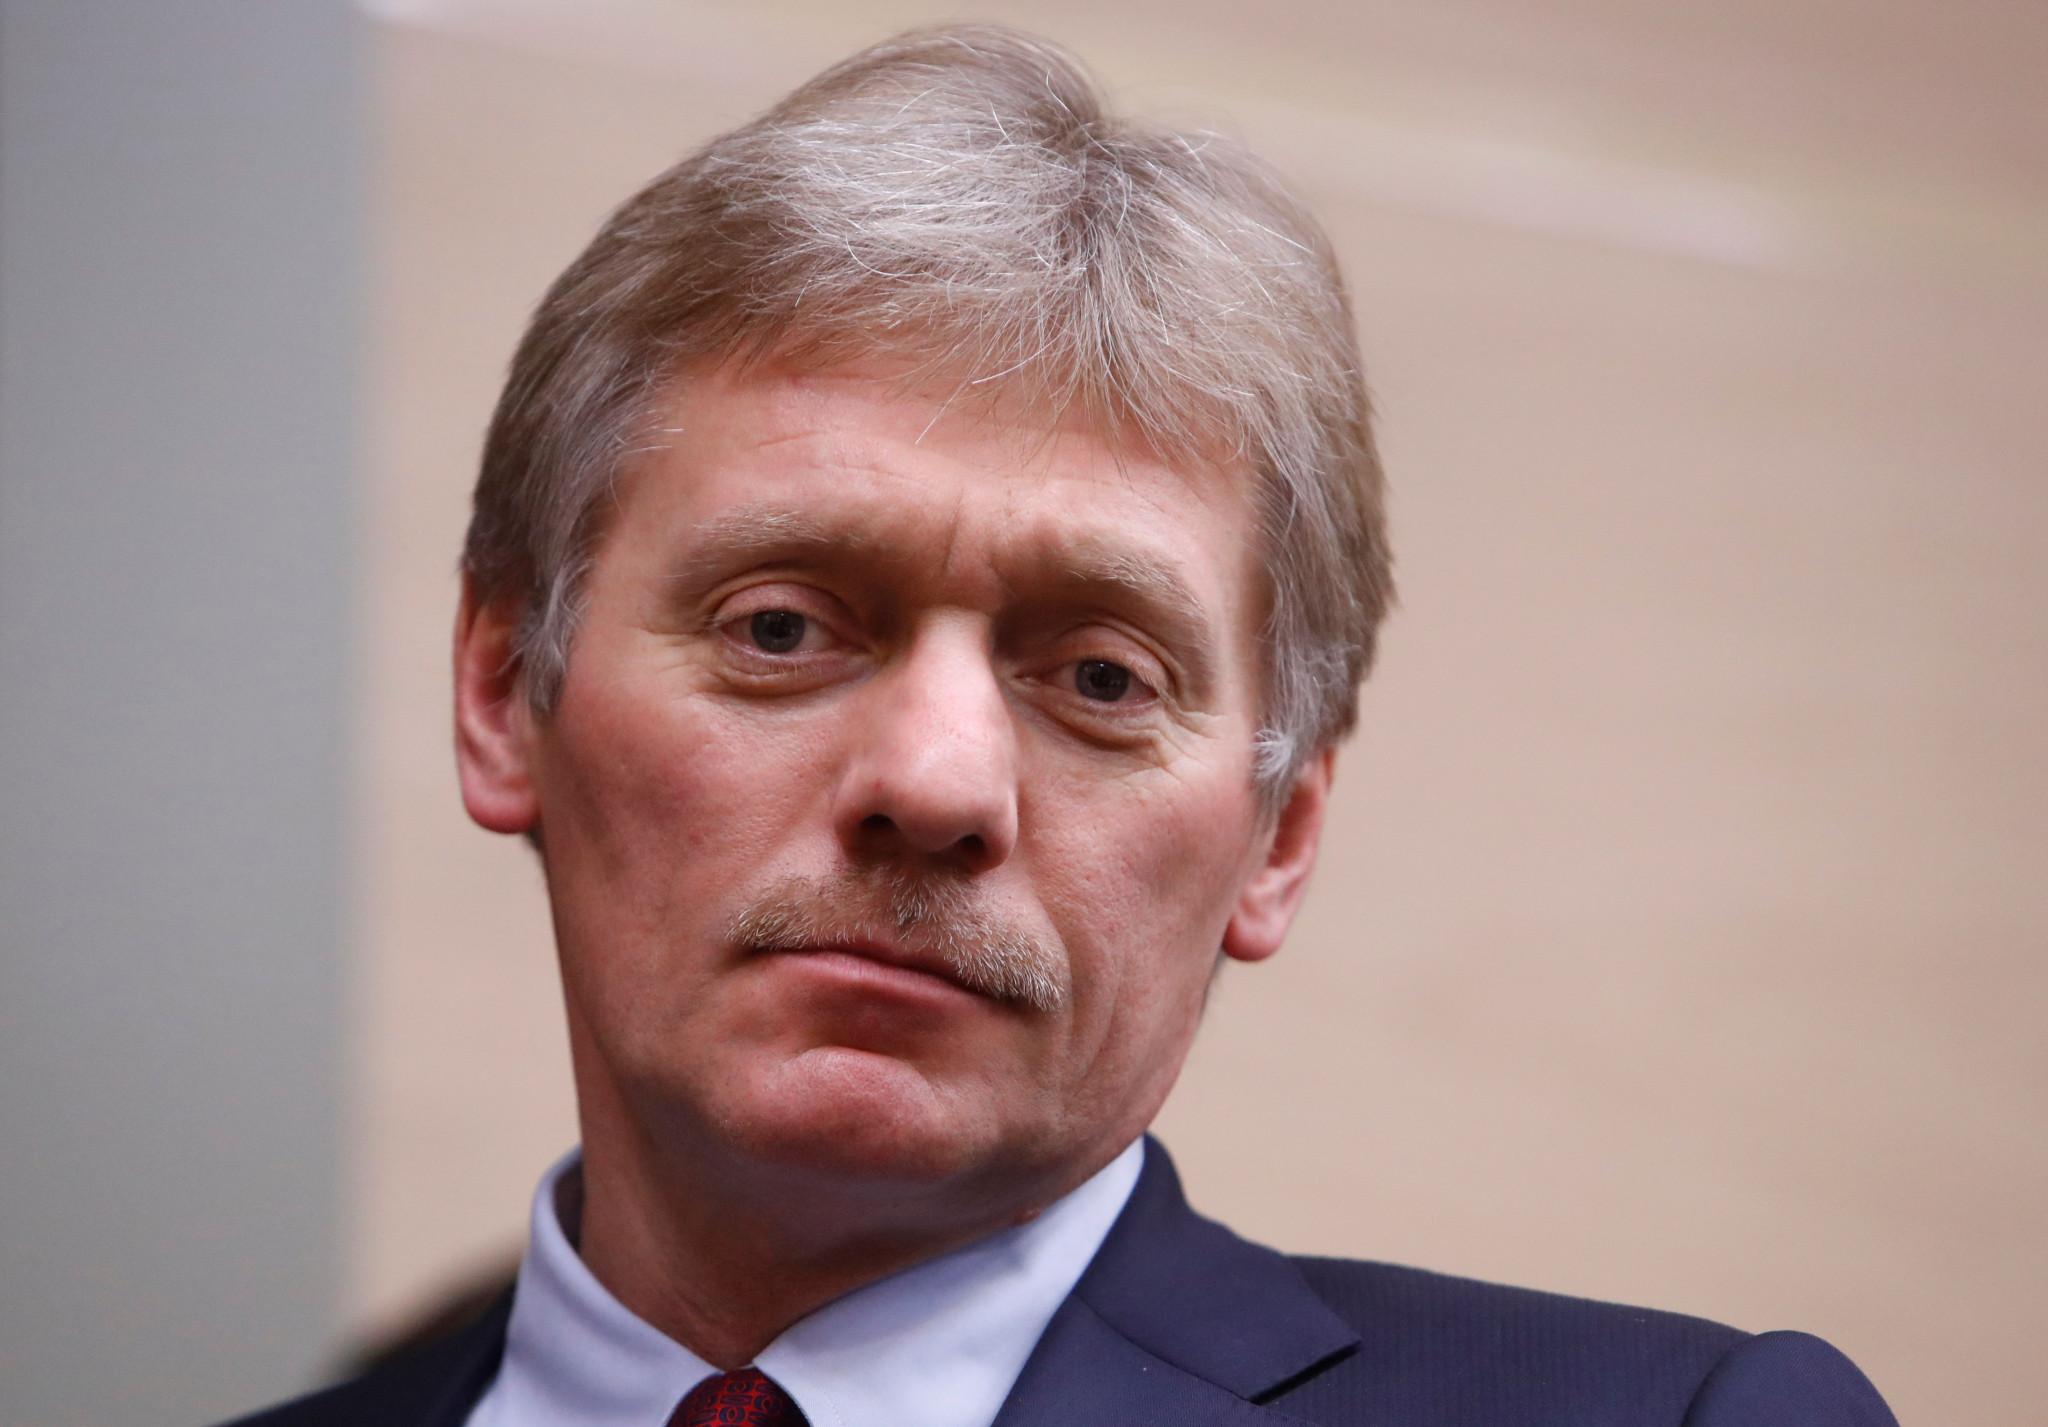 The Kremlin's Presidential spokesman Dmitry Peskov has reacted positively to the decision from the IPC to conditionally lift Russia's suspension ©Getty Images